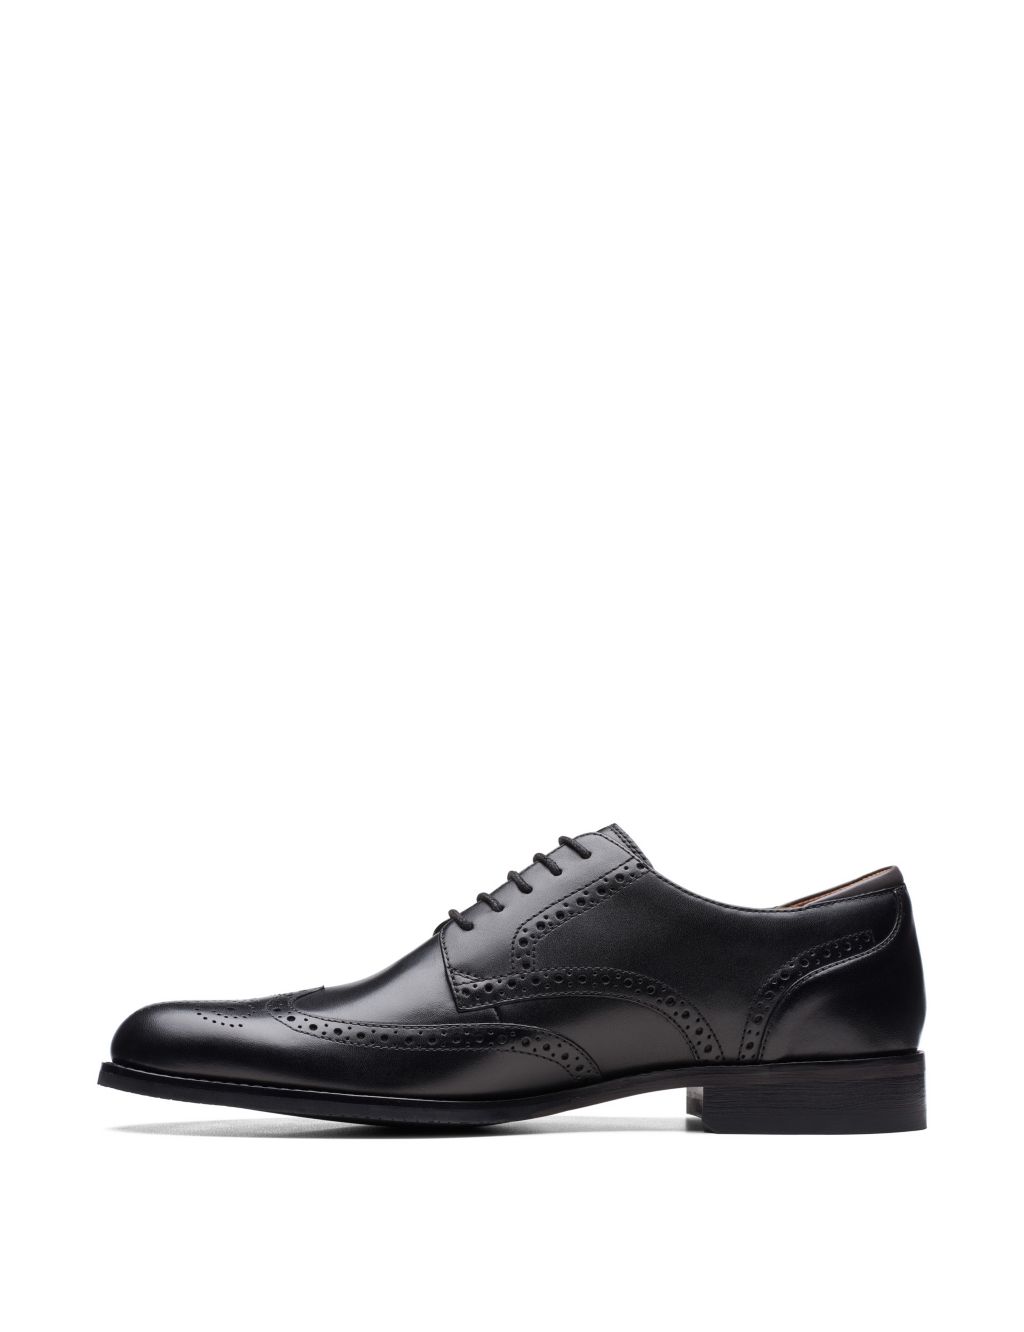 Leather Brogues image 6